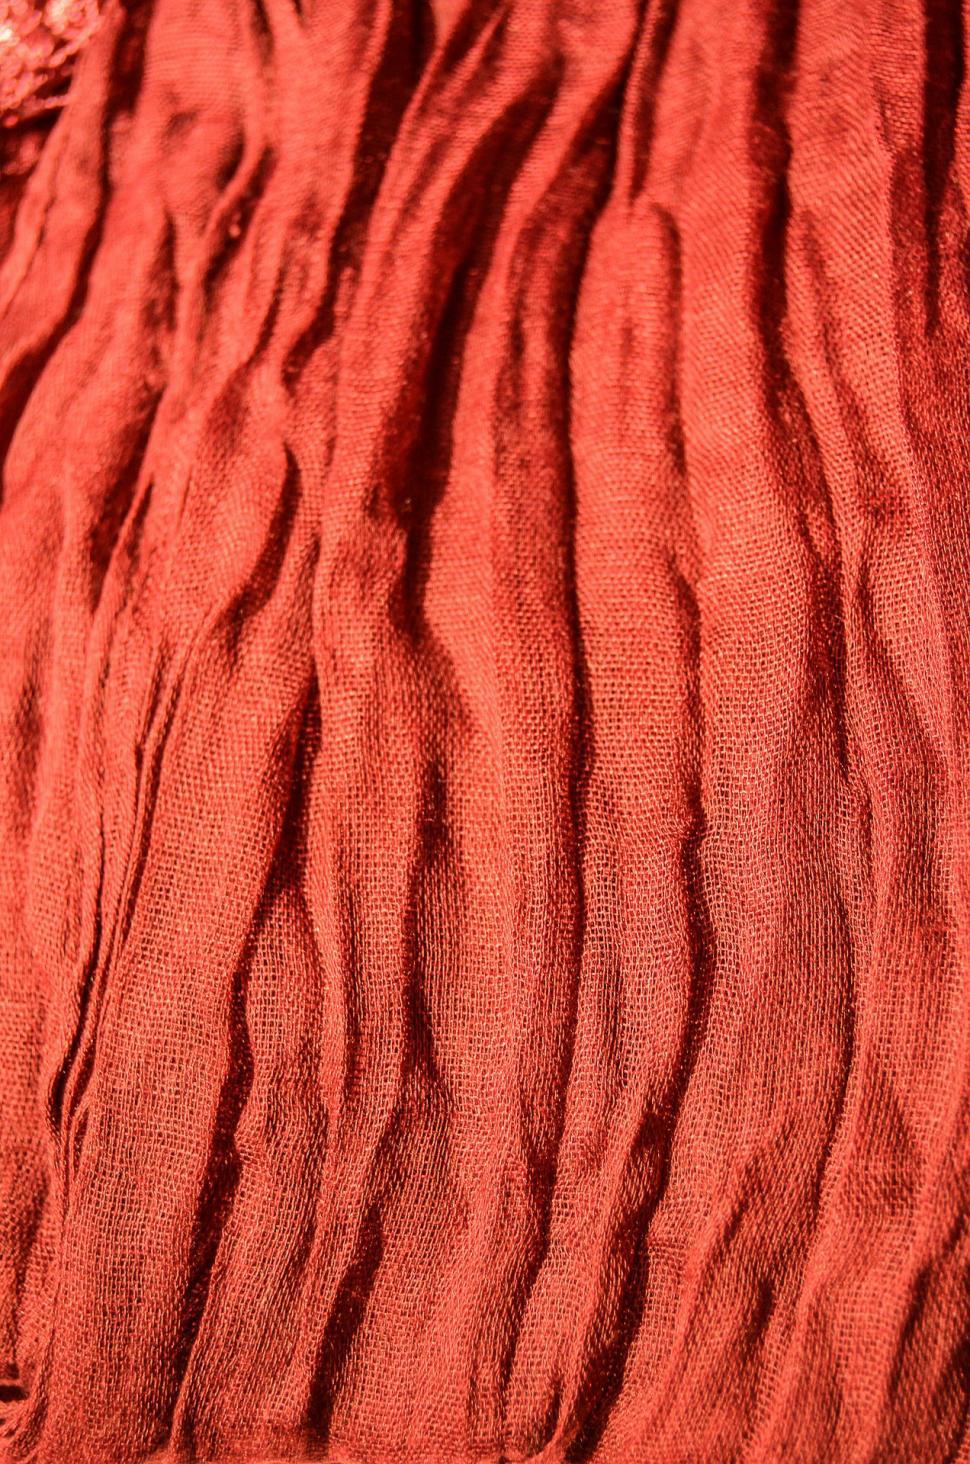 Free Image of Close-Up of Red Cloth With Pattern 